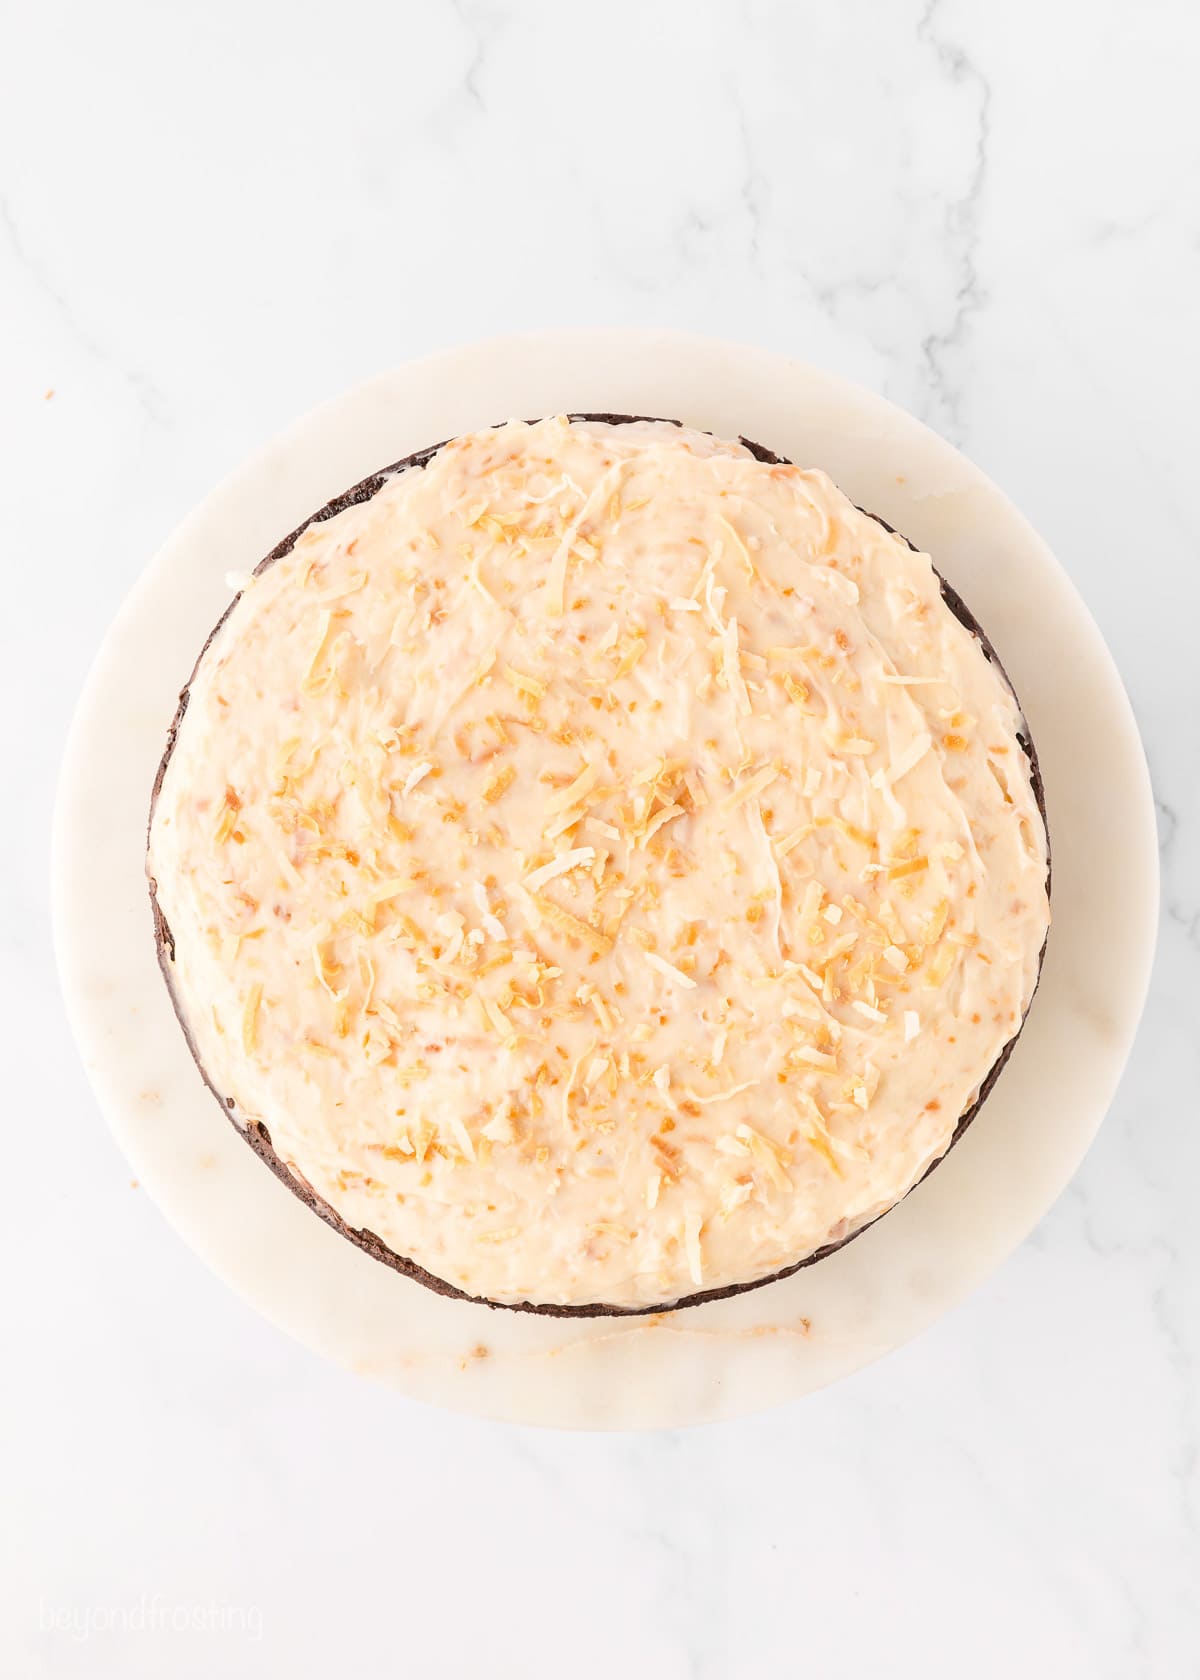 Overhead view of a chocolate cake layer frosted with caramel cream cheese frosting and topped with toasted coconut.